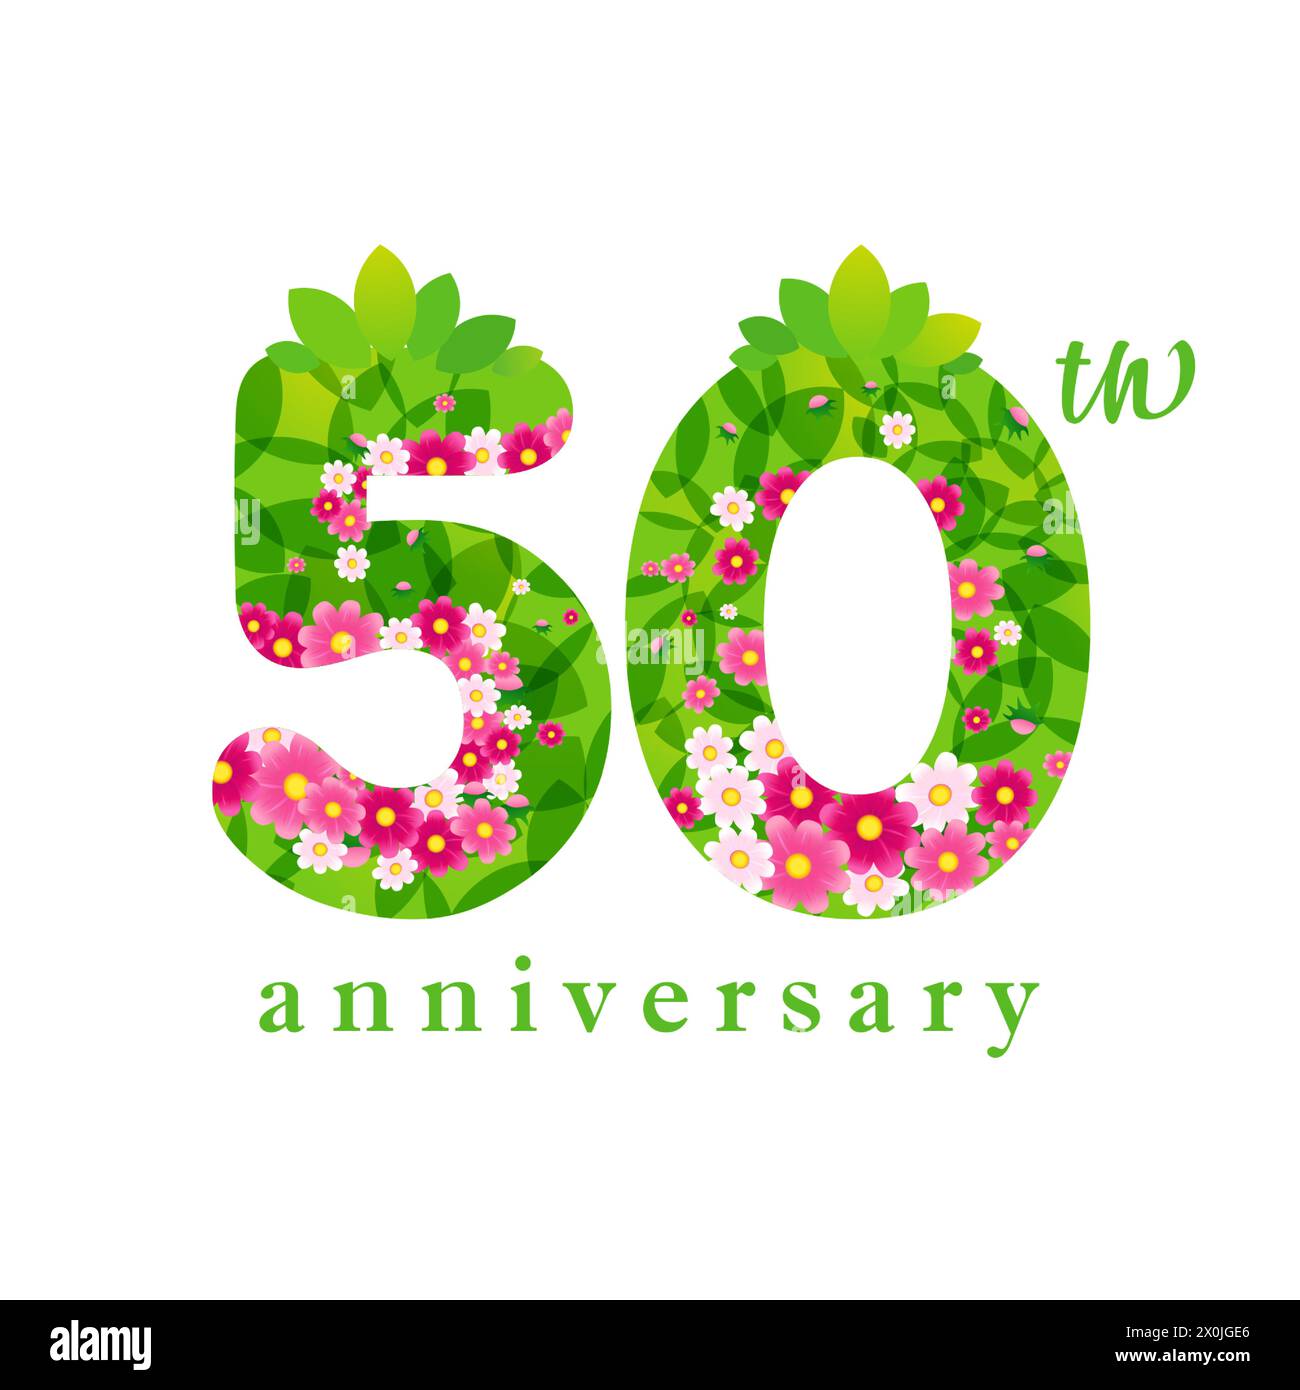 50th anniversary summer logo. Creative number 5 and 0 with green leaves and flowers. 3D elements. Cute floral background with vector clipping mask. Stock Vector